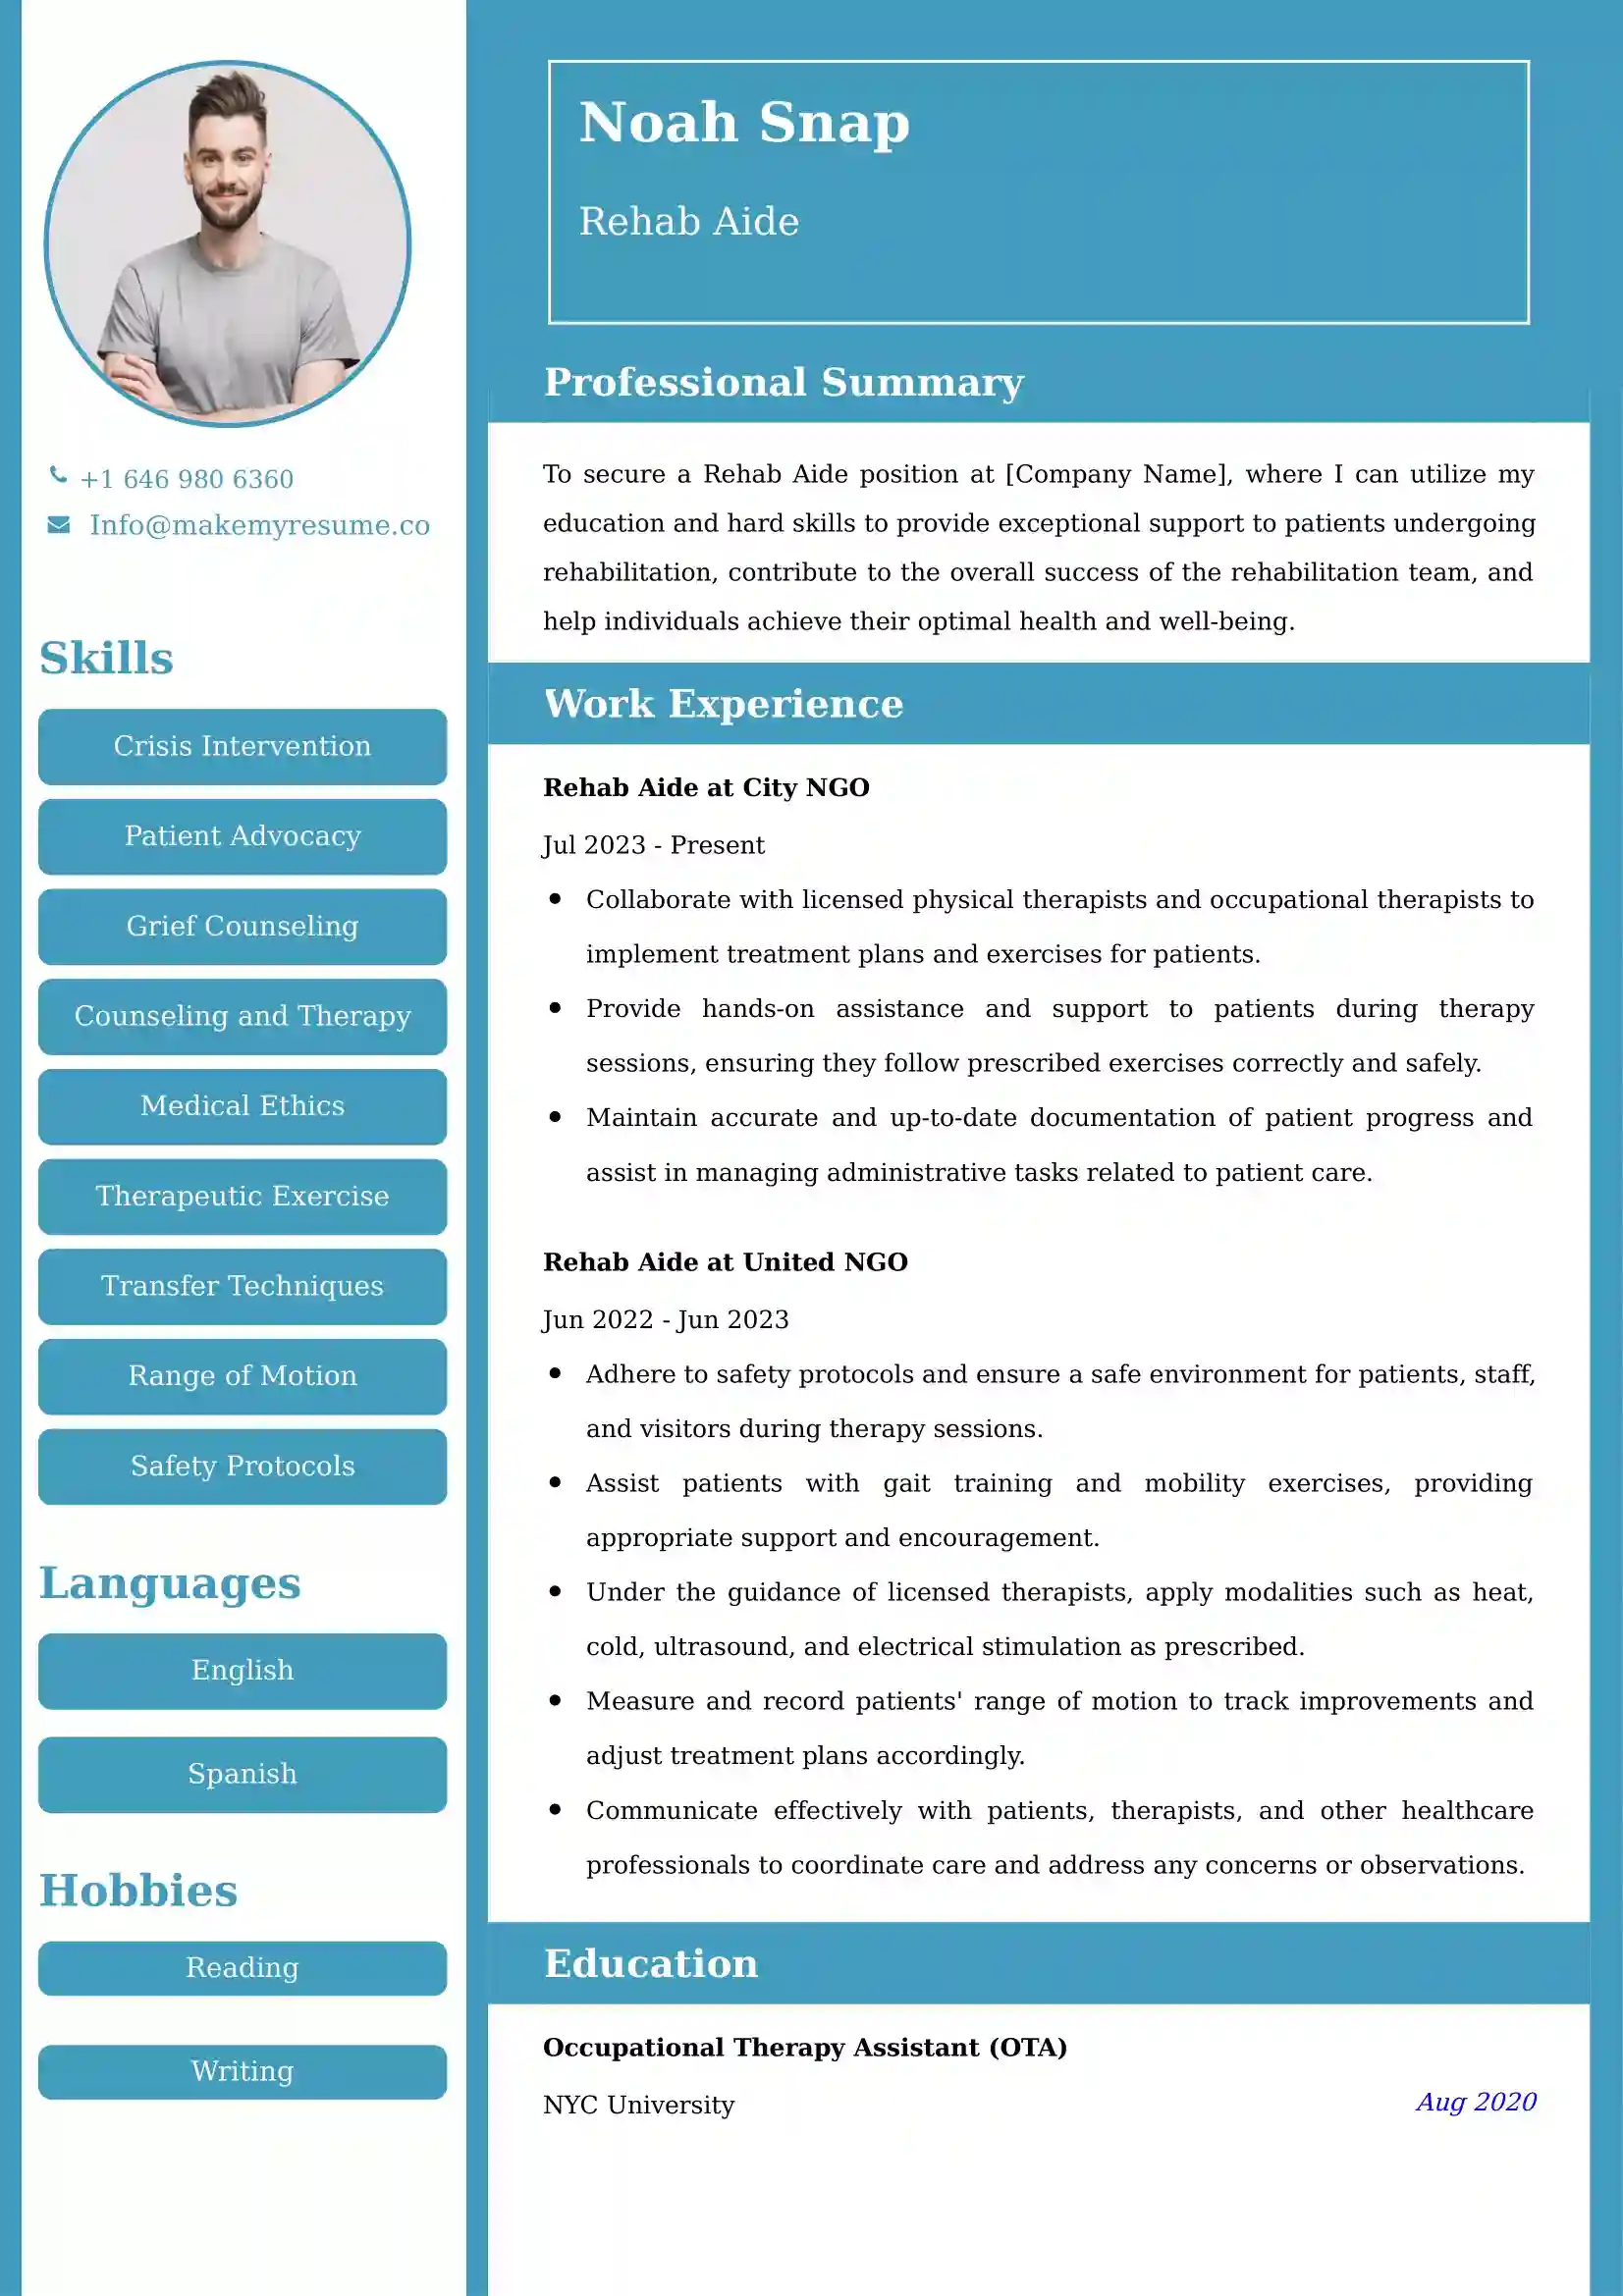 Rehab Aide Resume Examples - UK Format, Latest Template.